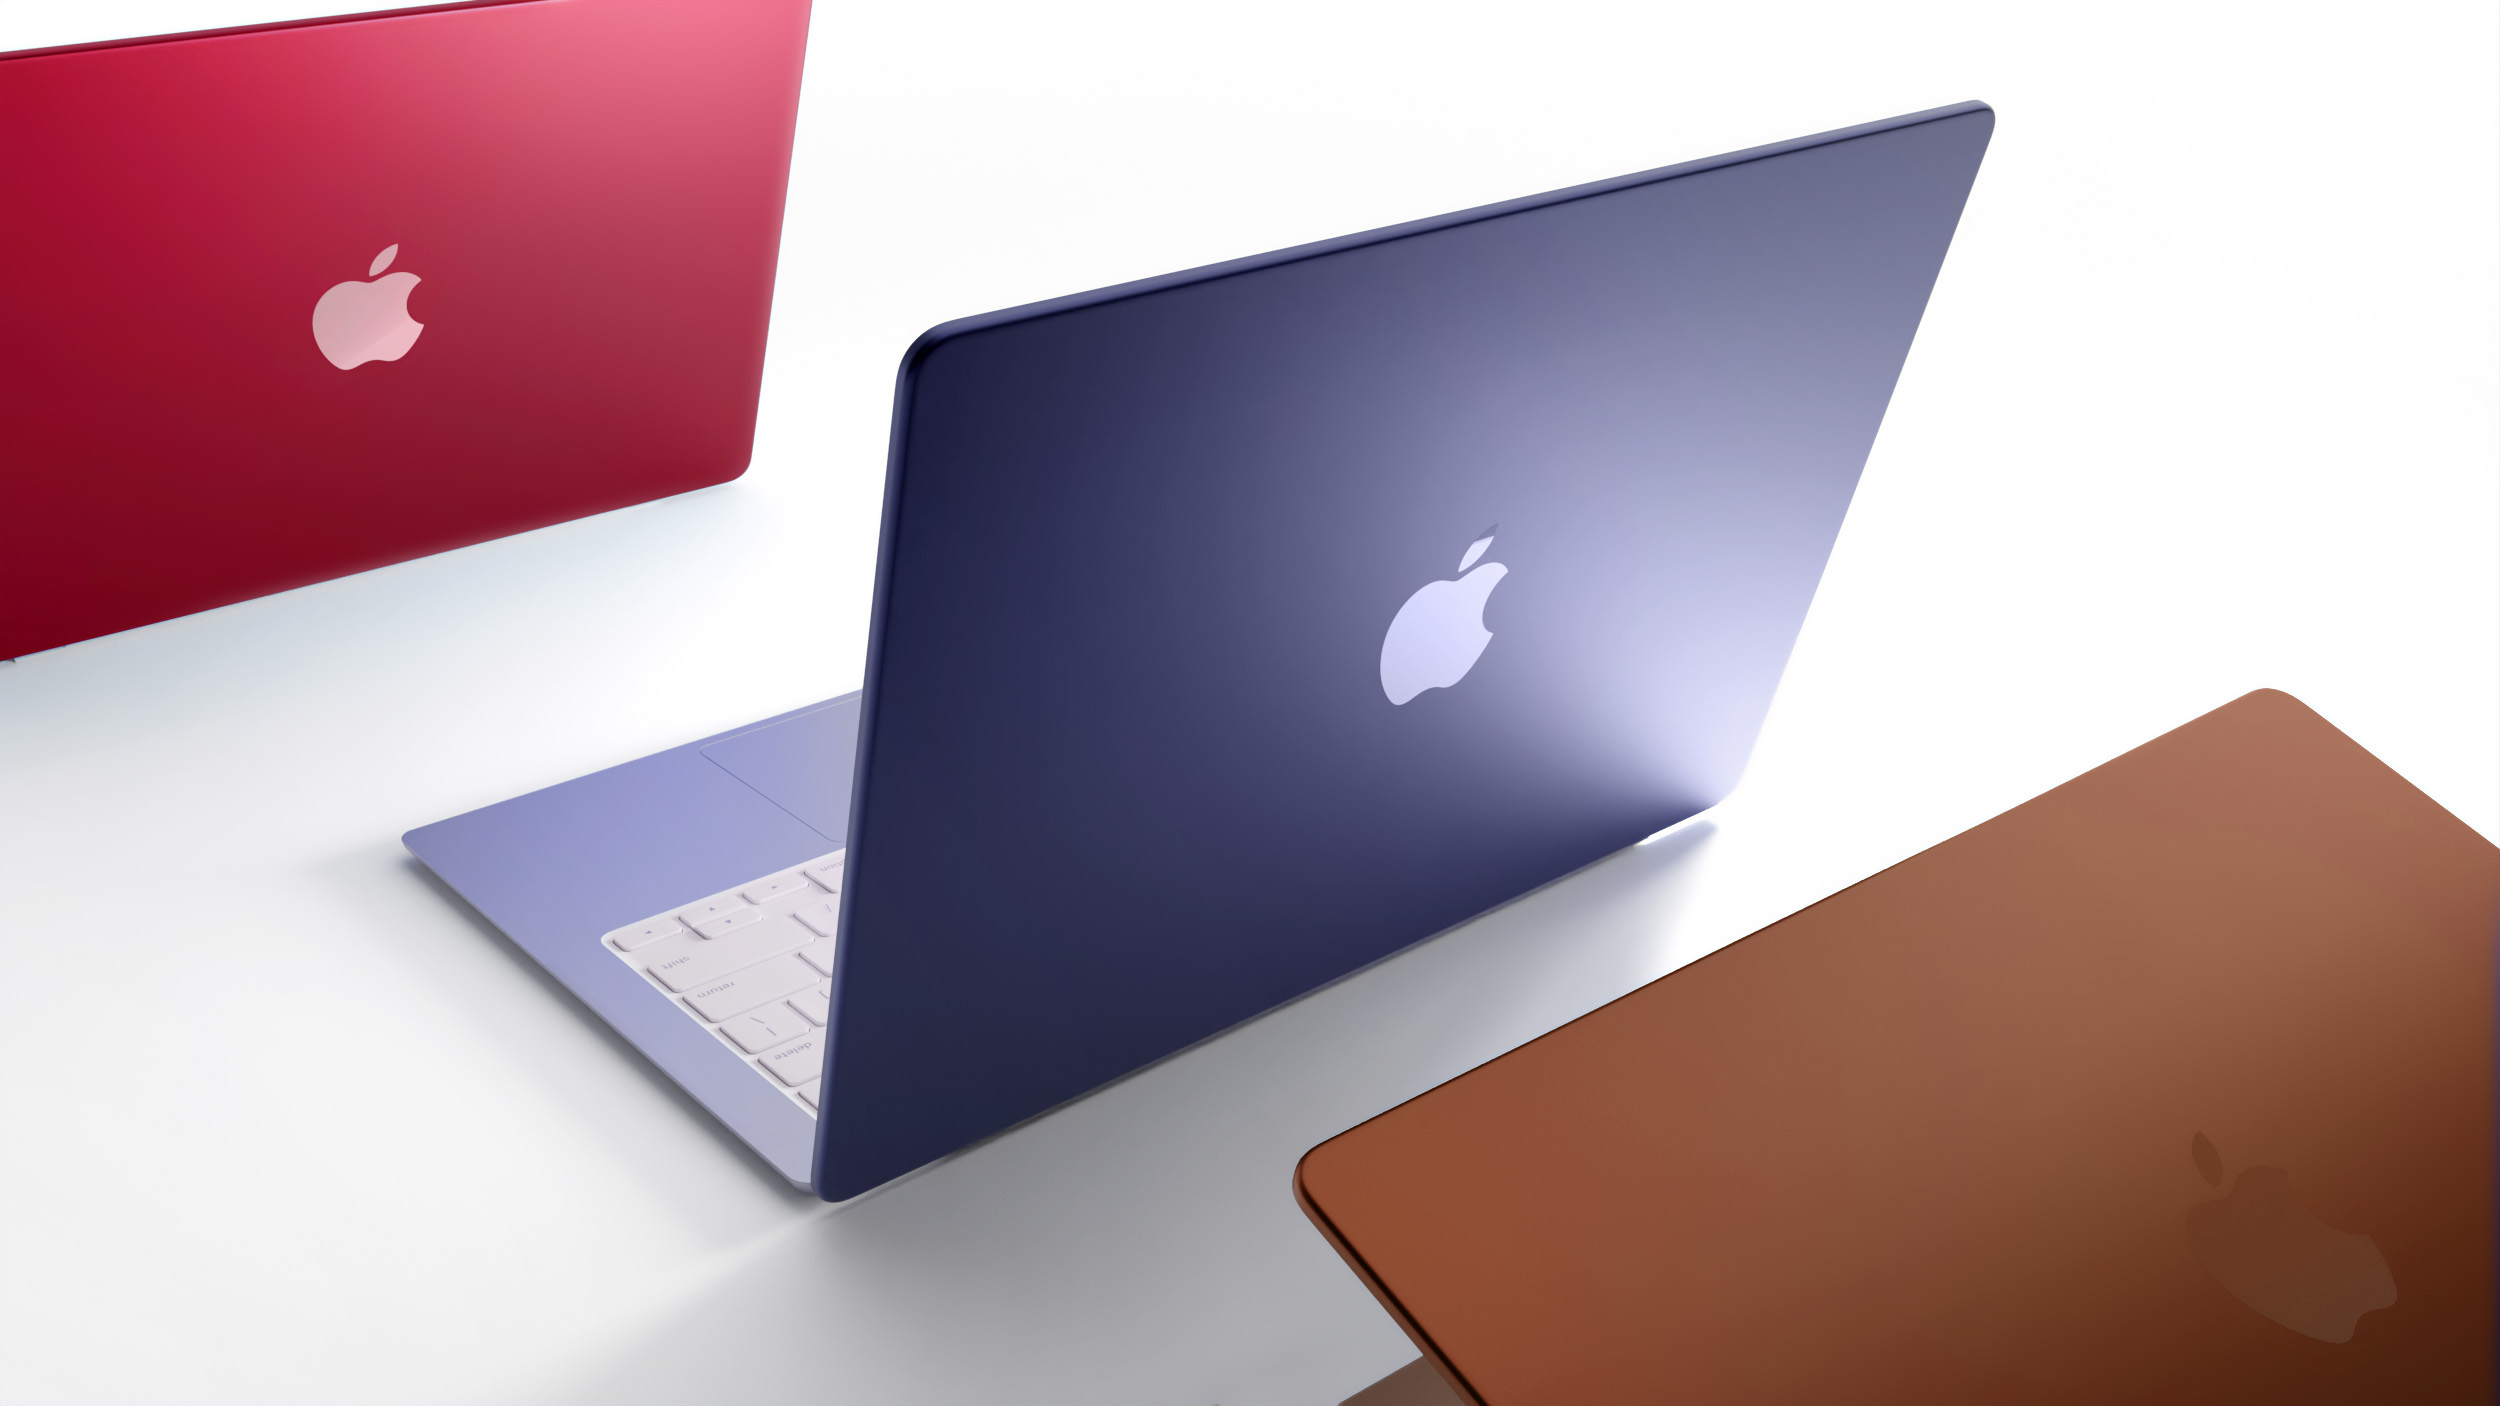 M2 MacBook Air Among Most Likely WWDC Hardware Announcements, AR/VR Headset Unlikely